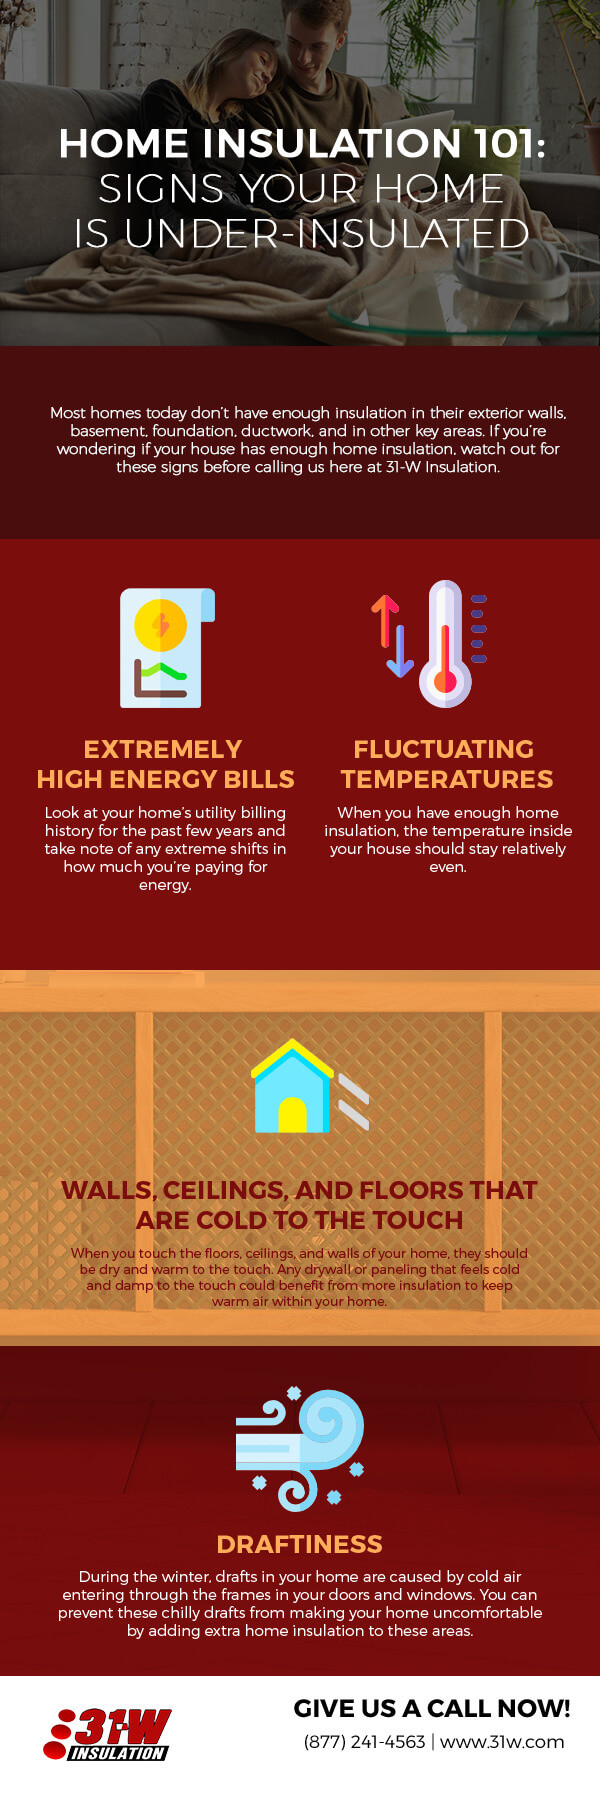 Home Insulation 101: Signs Your Home is Under-Insulated